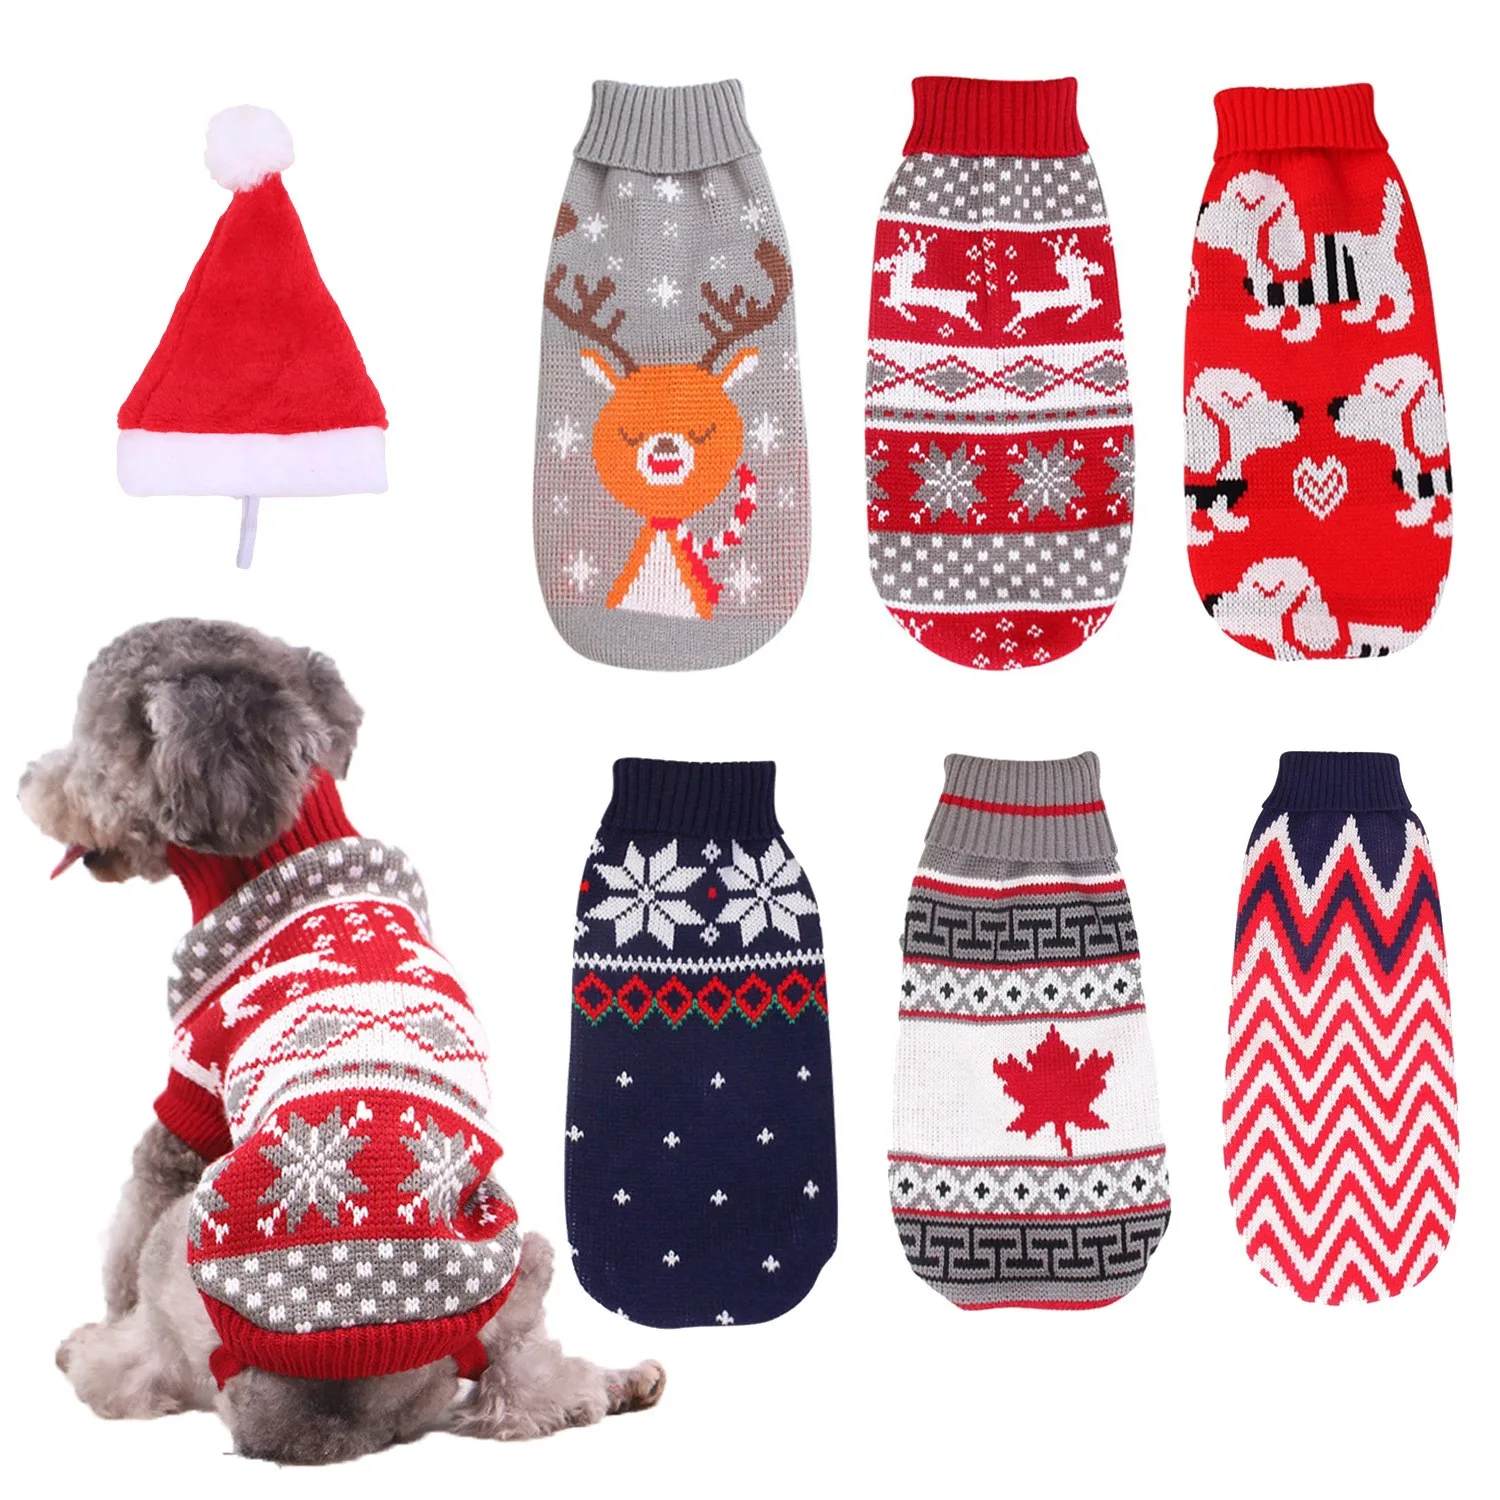 Autumn Winter Warm Cat Sweater Christmas Dog Clothes Small Dog Chihuahua Cartoon Yorkie Coat Pet Clothing Supplies